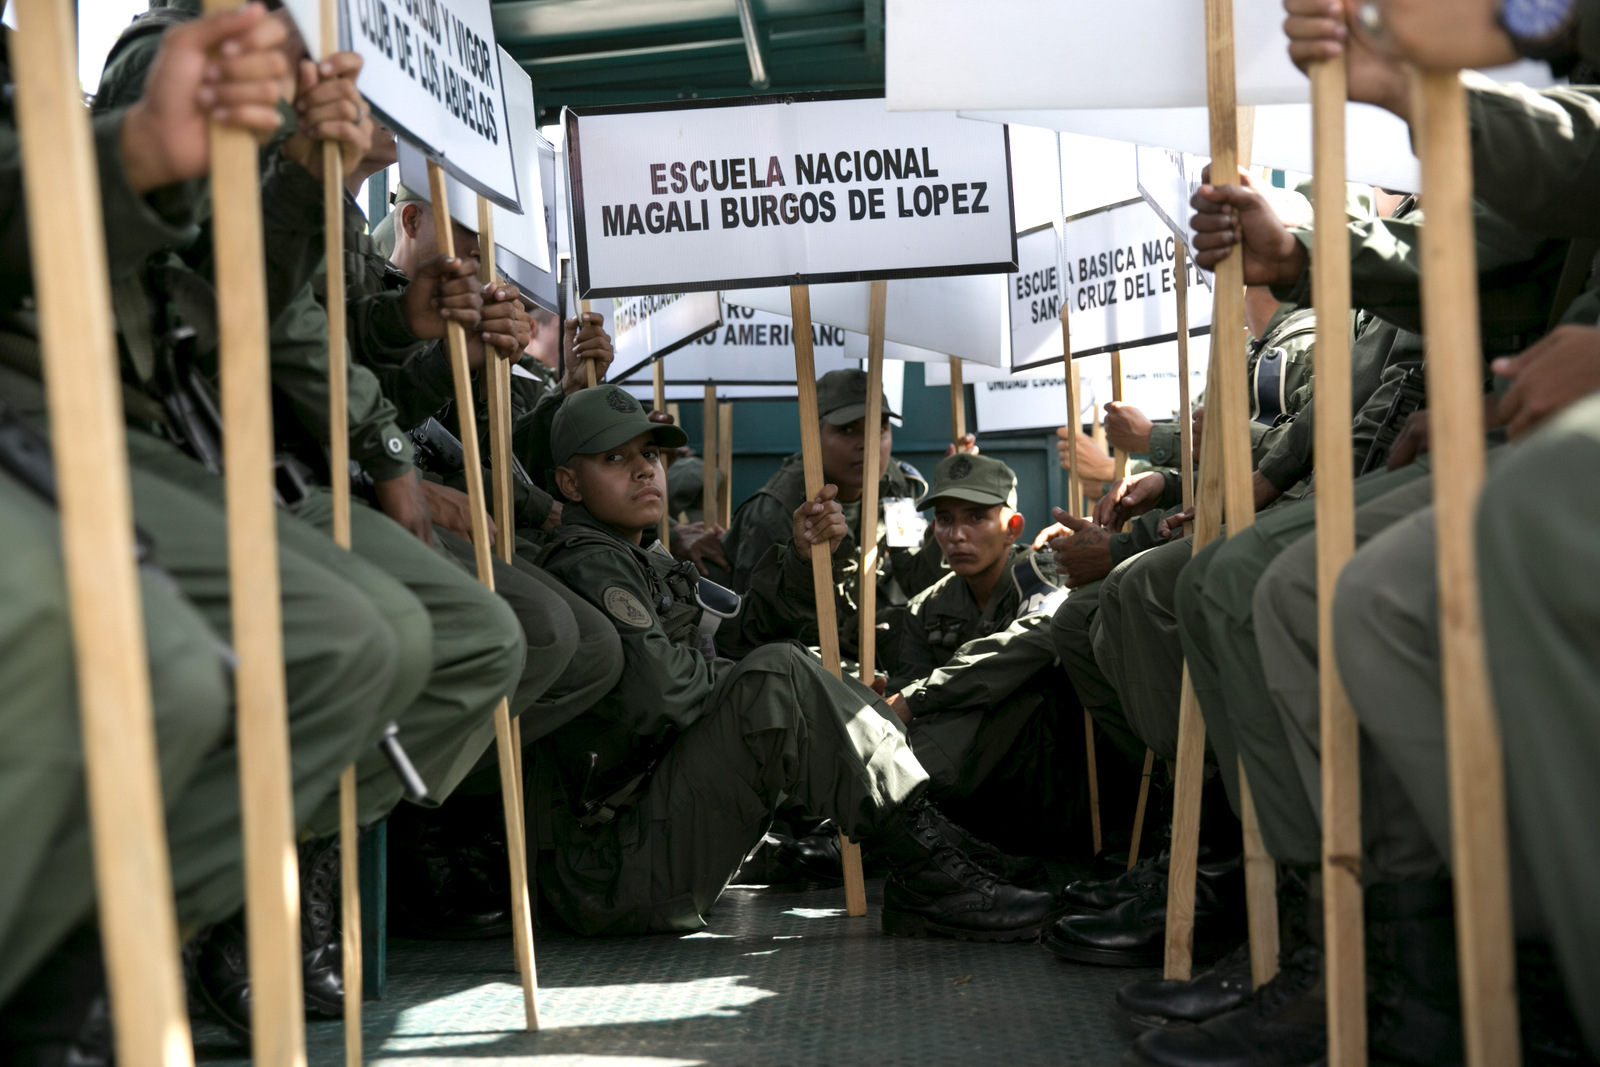 Soldiers hold signs of the names of schools that will serve as voting centers as they leave for those schools in Caracas, May 15, 2018. AP | Ariana Cubillos